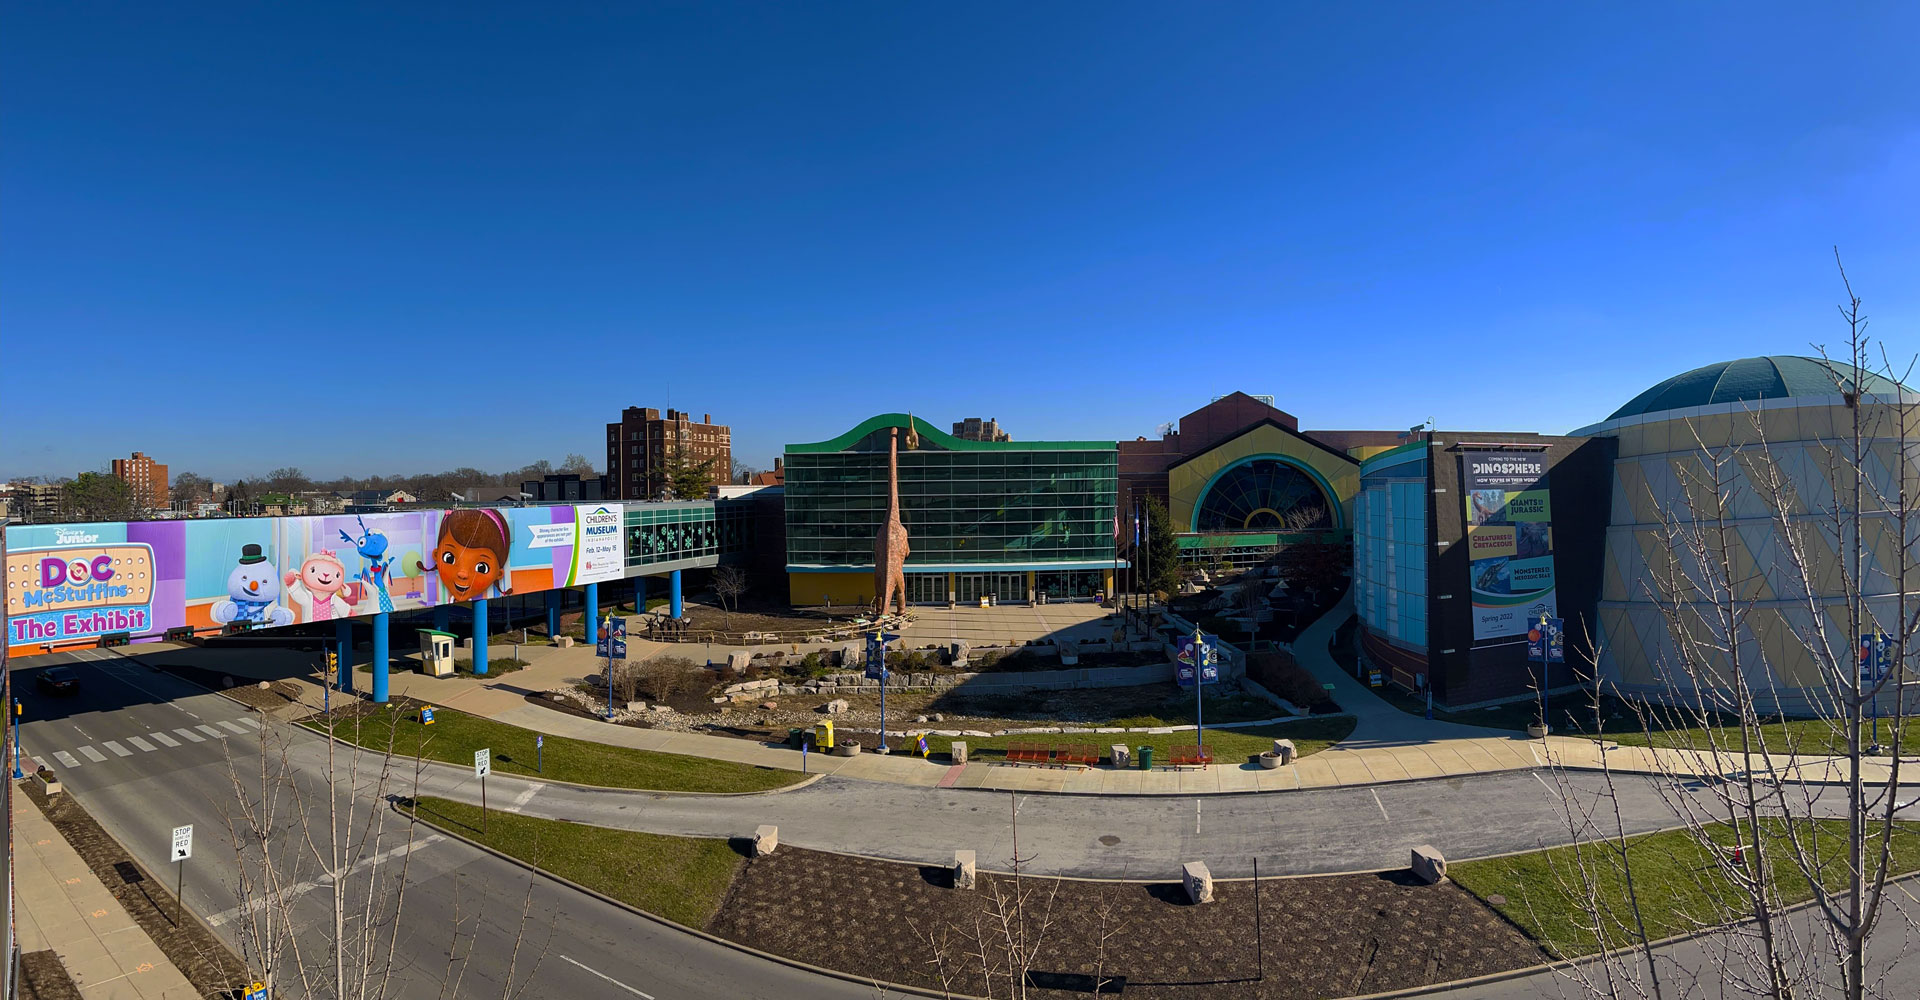 The Children's Museum exterior with the Skywalk featuring Doc McStuffins: The Exhibit